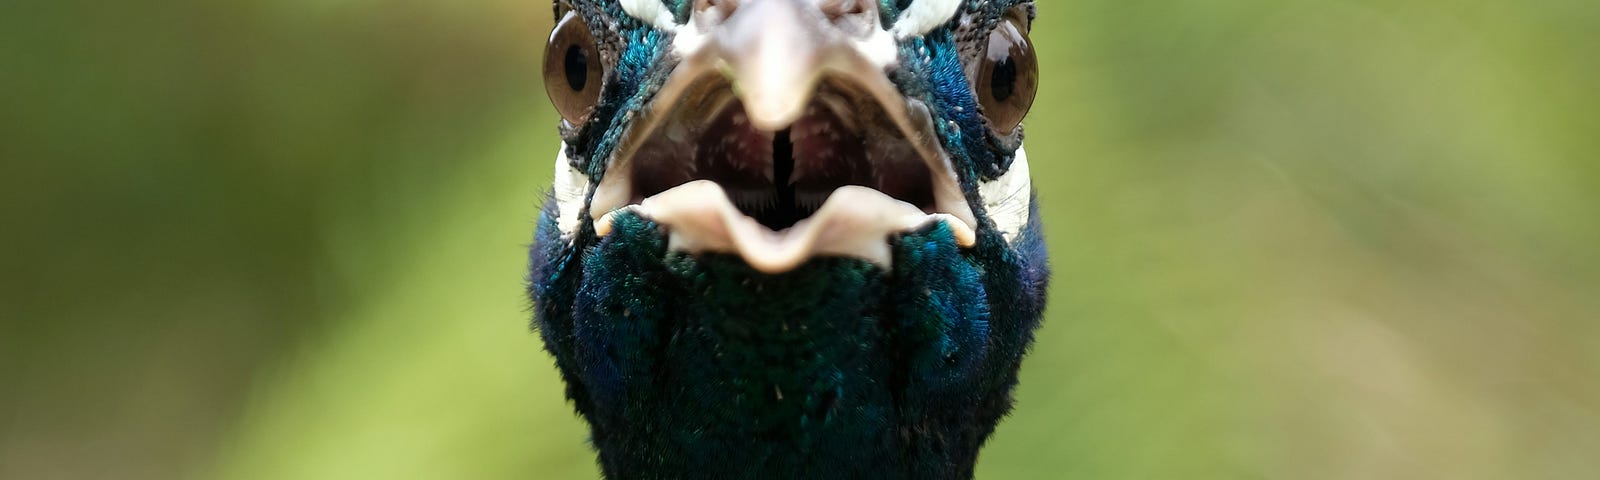 Head of a peacock in attack mode.